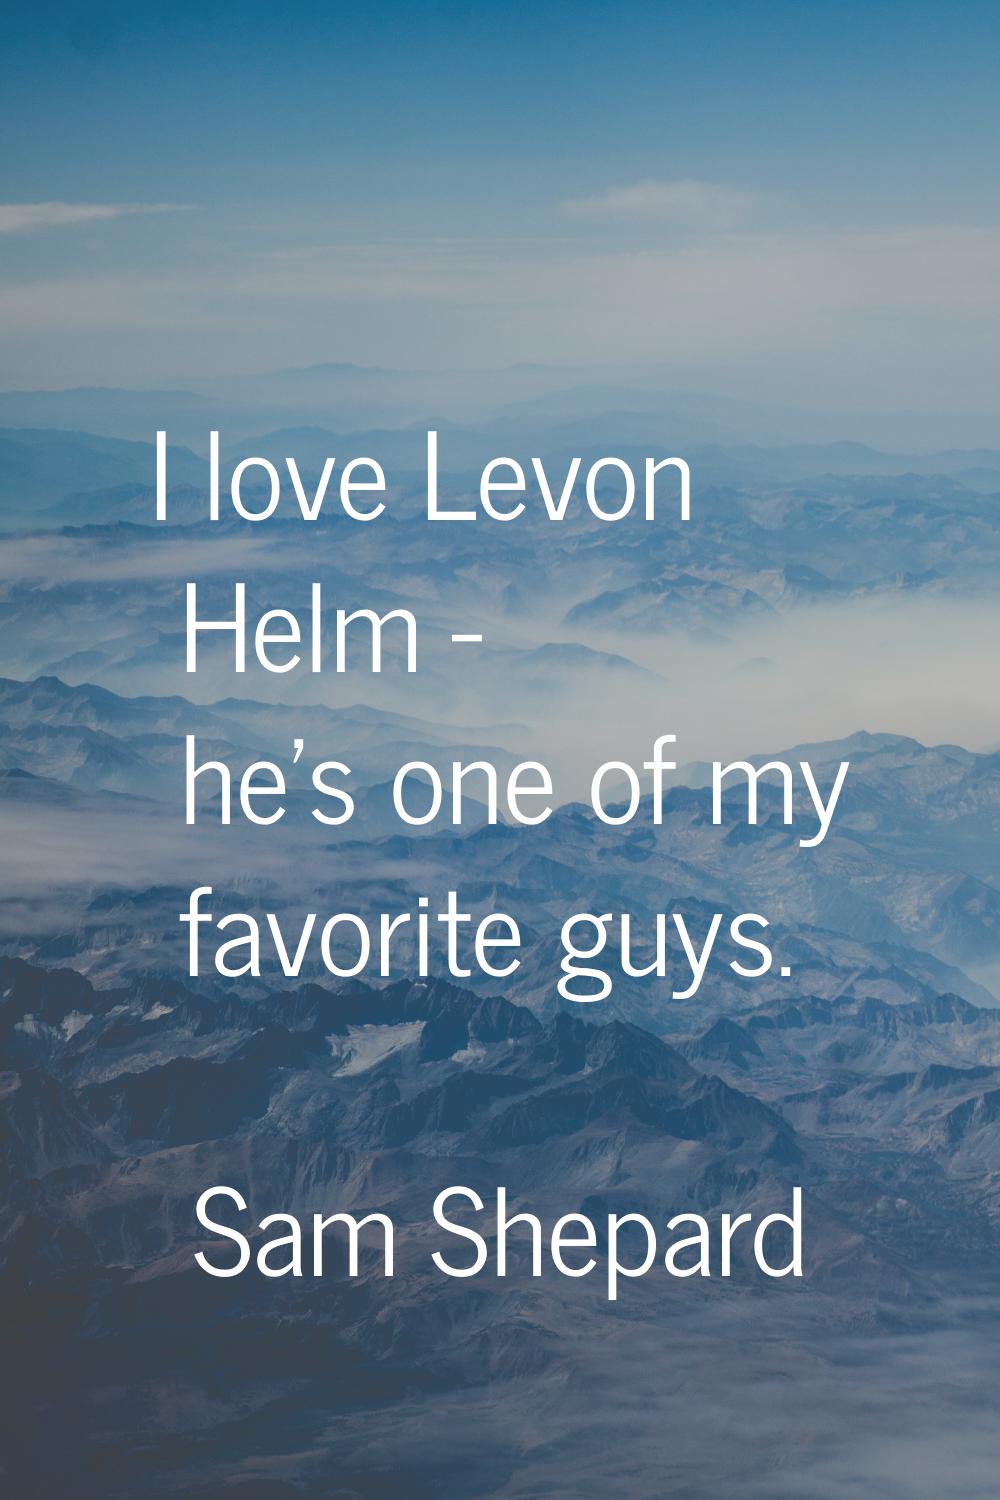 I love Levon Helm - he's one of my favorite guys.